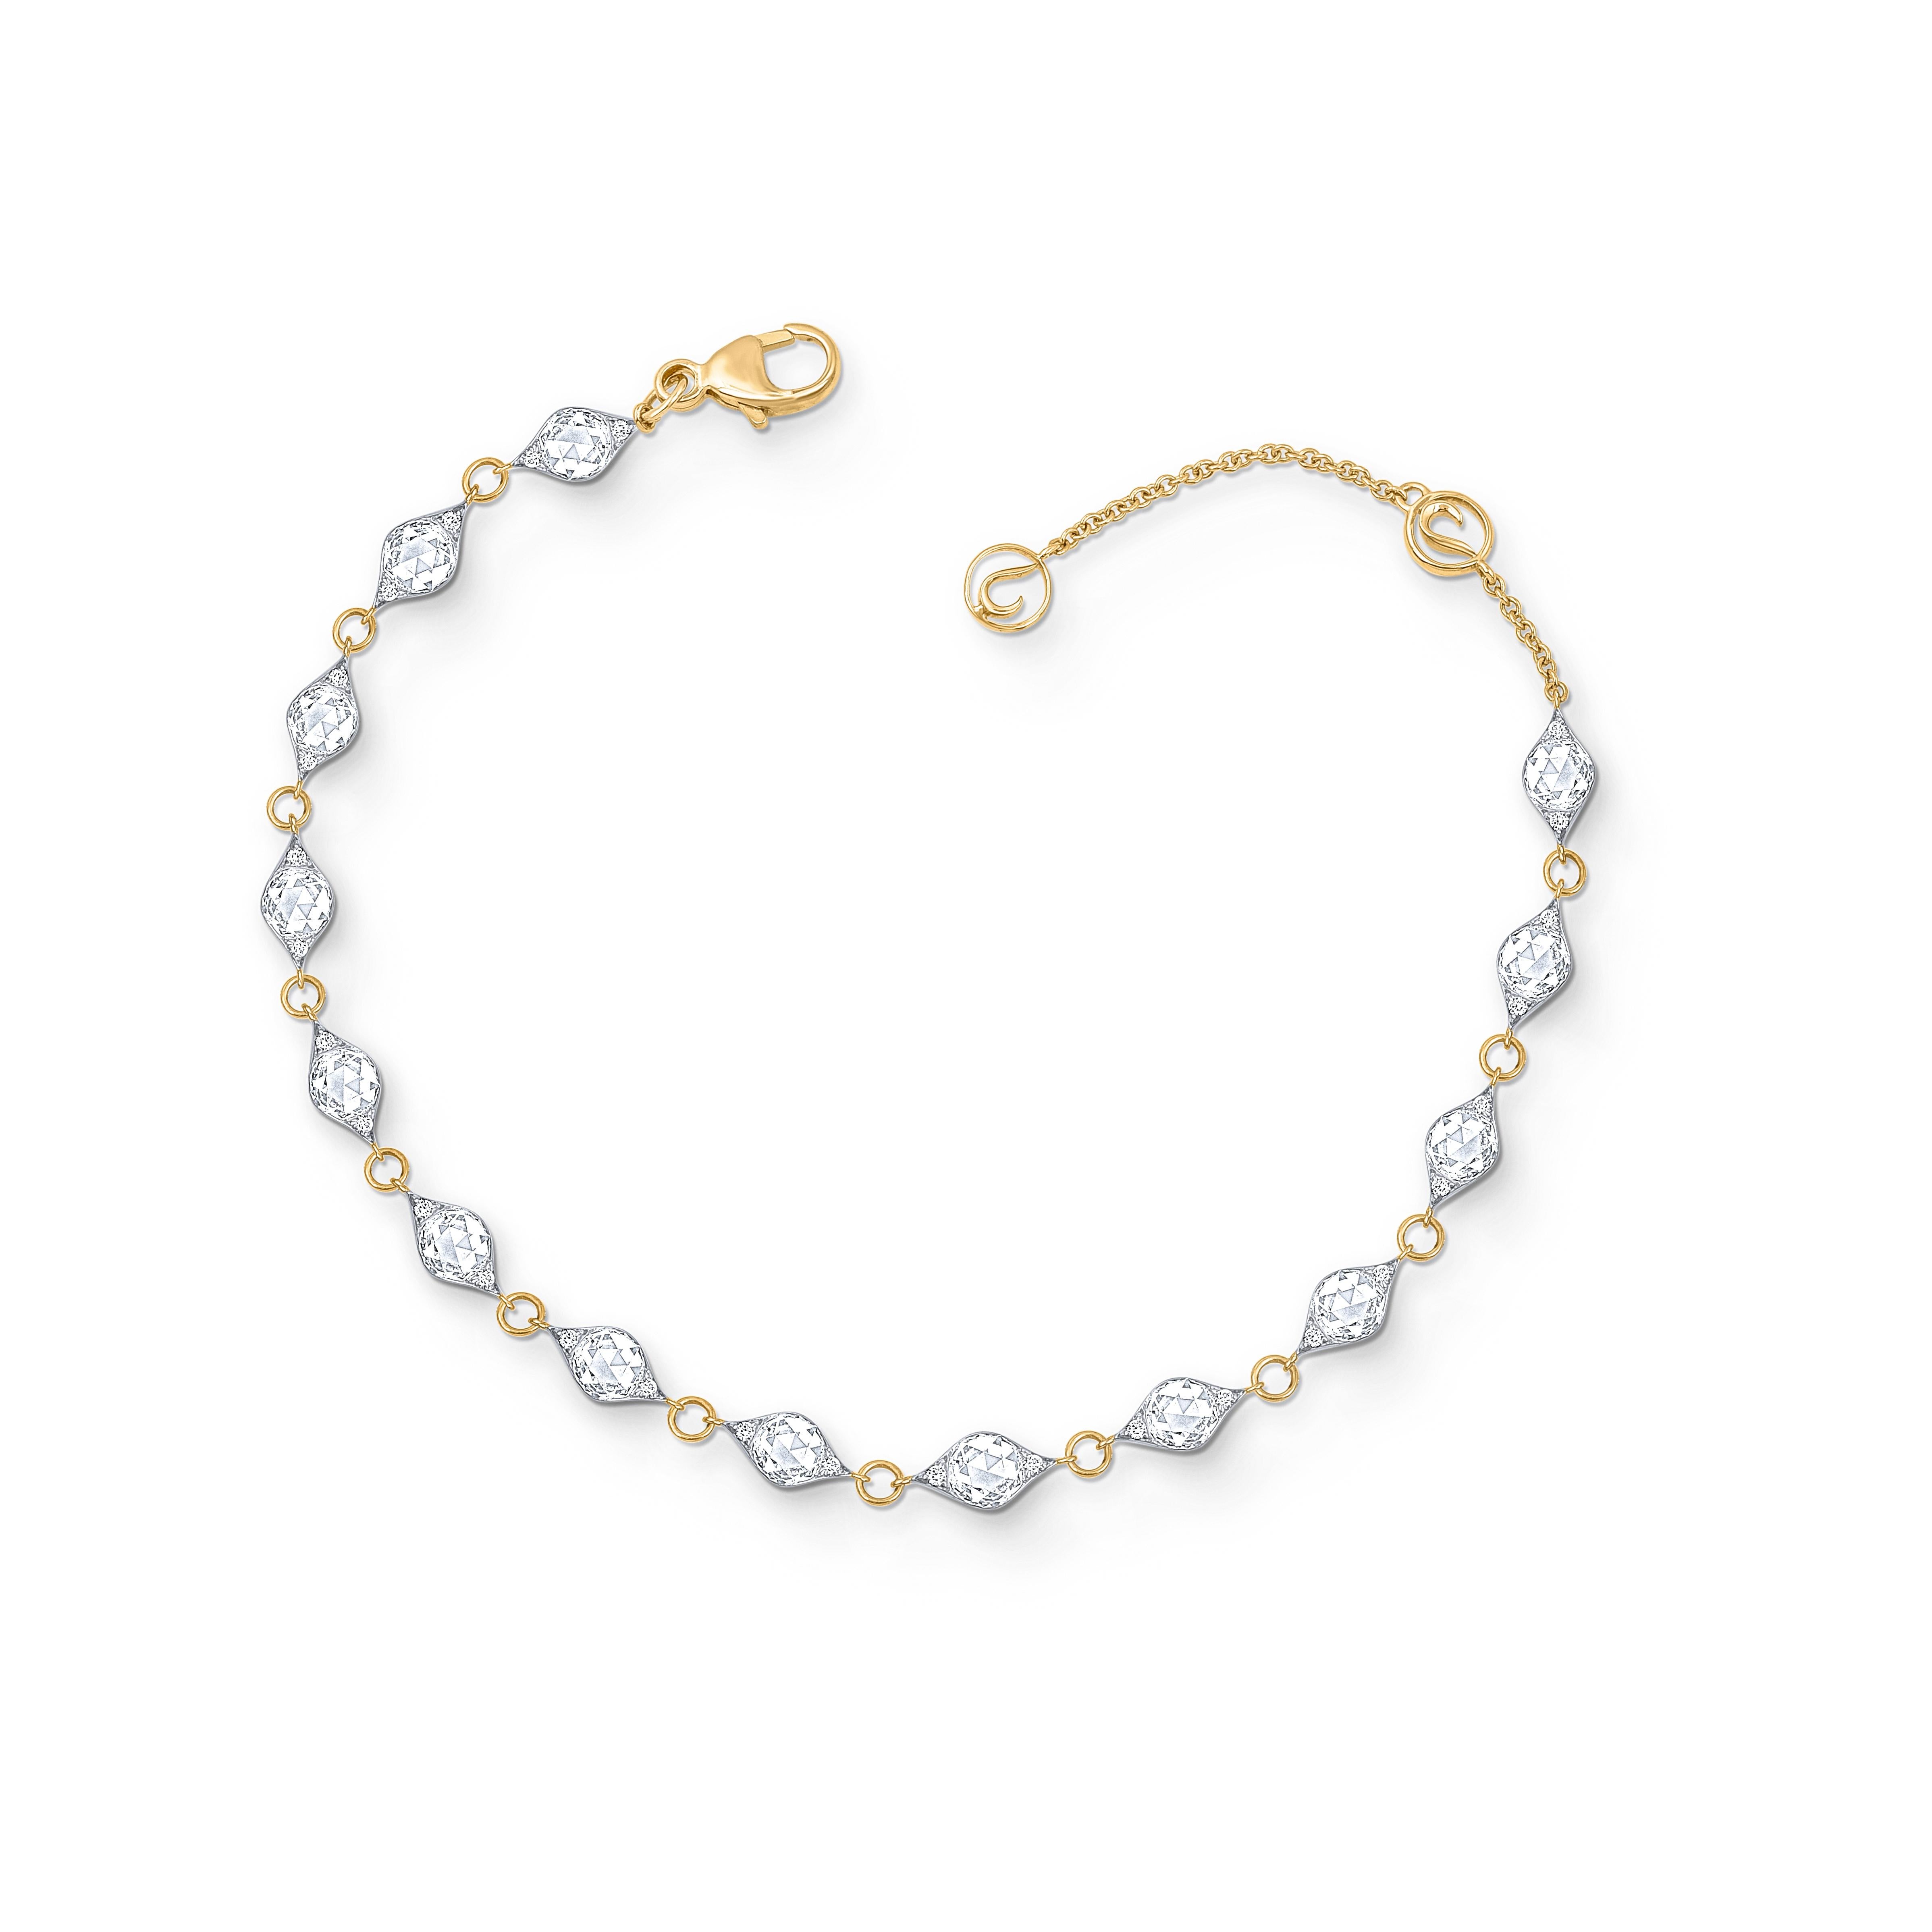 The Mandala Collection bracelet is studded with brilliant and rose cut diamonds and beautifully crafted in 18kt white and yellow gold. The diamonds are graded as D-F color and IF-VS clarity. The total diamond weight is 1 5/8 carat.

This bracelet